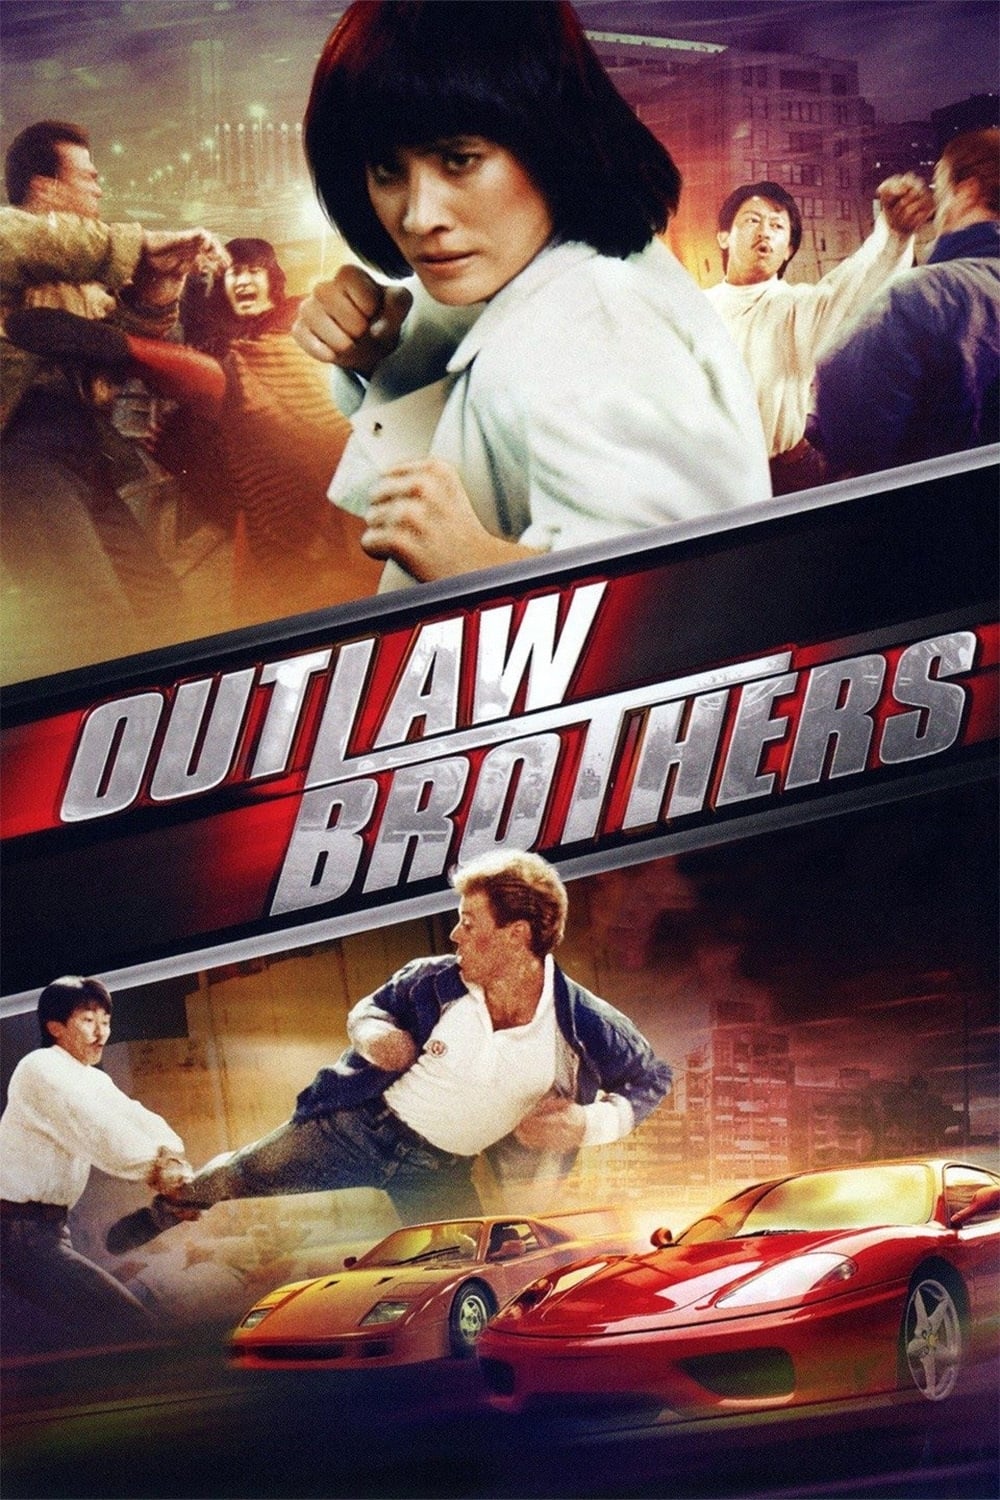 Born to Fight 4 - The Outlaw Brothers